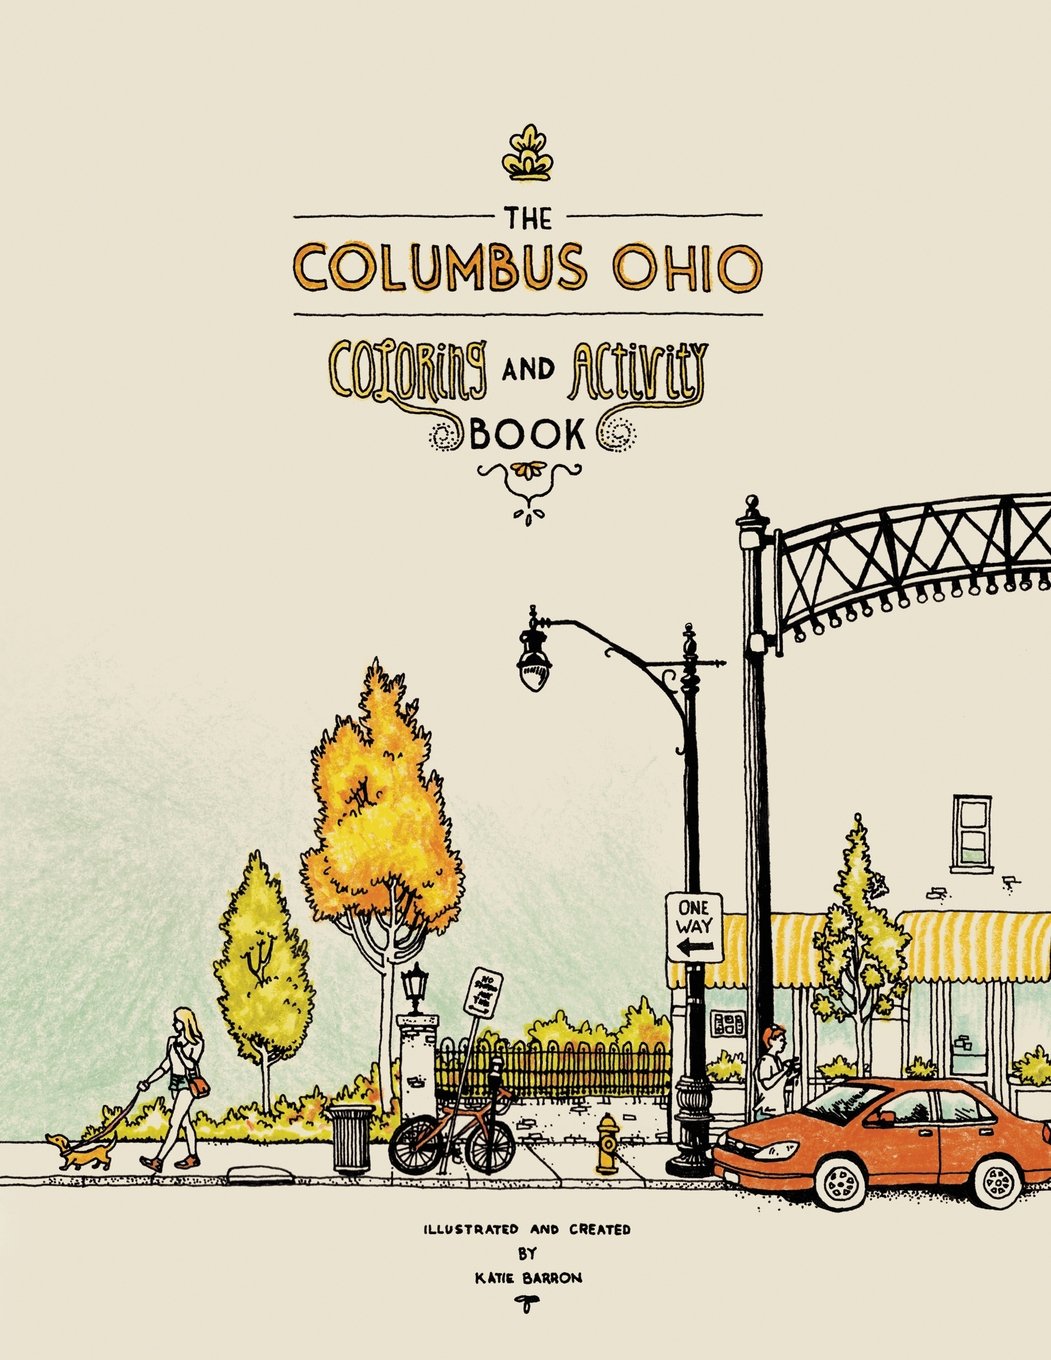 The cover artwork for The Columbus Ohio Coloring and Activity Book by Katie Barron